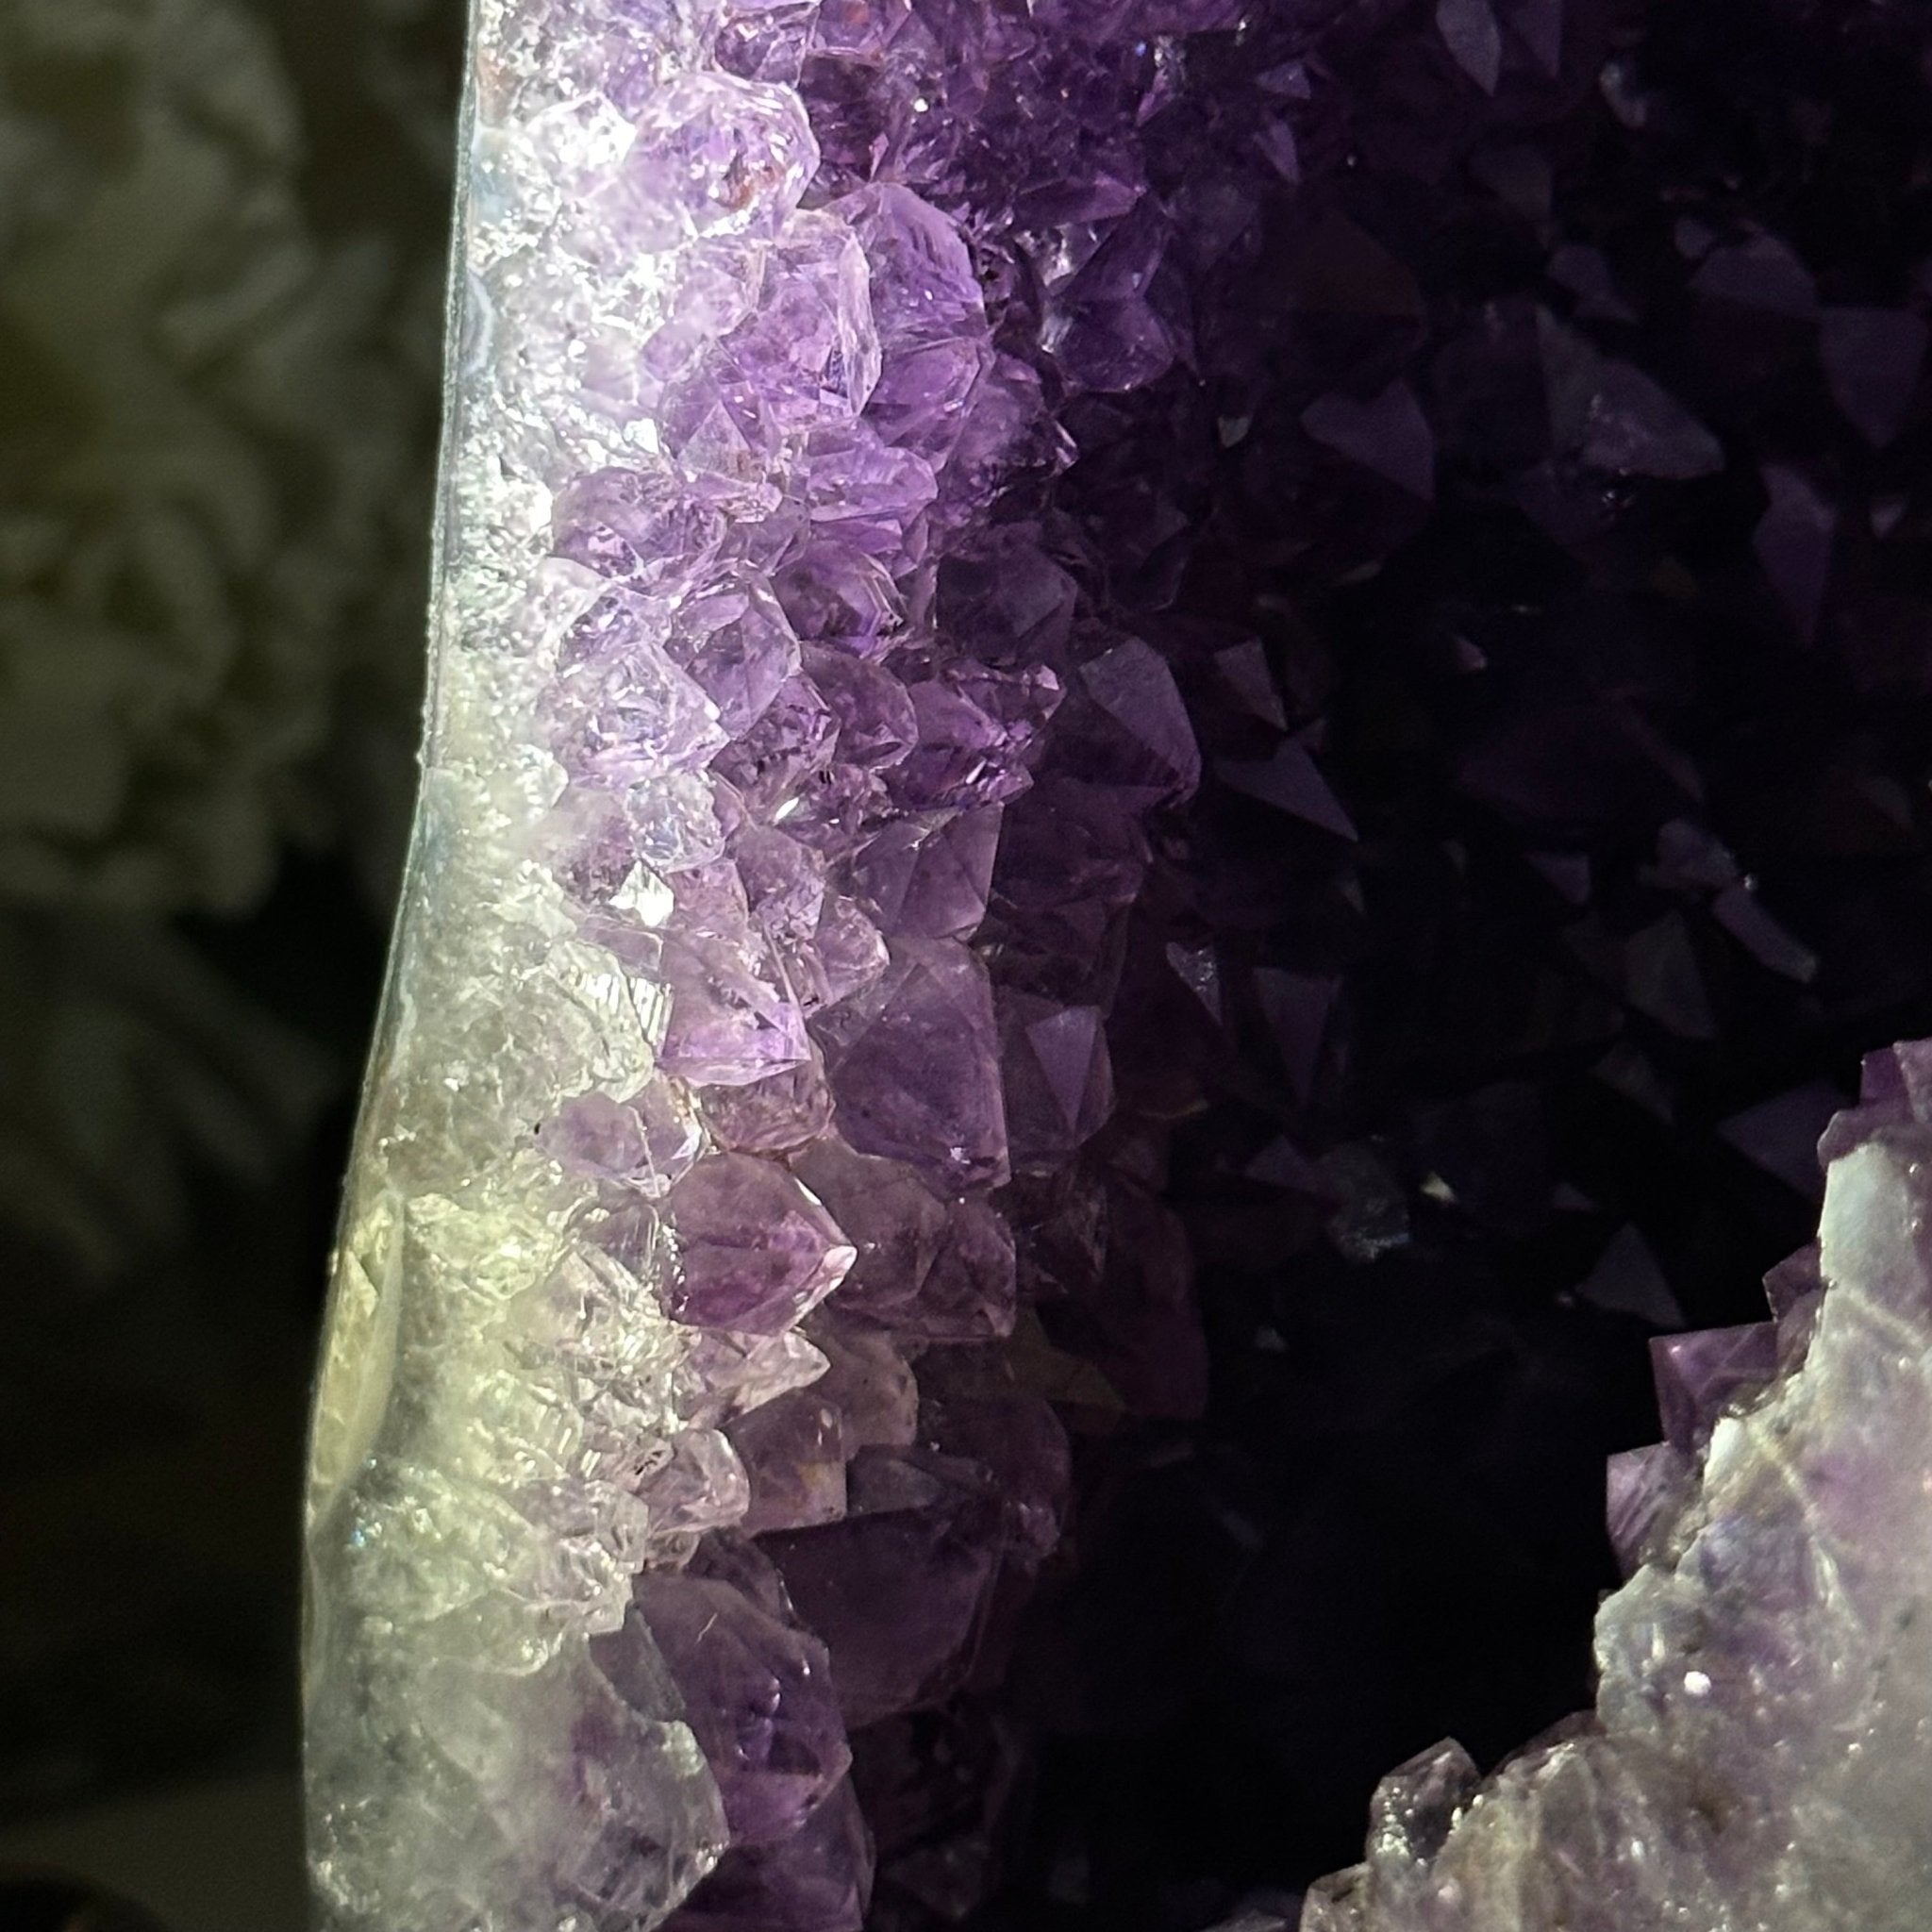 Quality Brazilian Amethyst Cathedral, 11.1 lbs & 9.6" Tall, #5601 - 1354 - Brazil GemsBrazil GemsQuality Brazilian Amethyst Cathedral, 11.1 lbs & 9.6" Tall, #5601 - 1354Cathedrals5601 - 1354